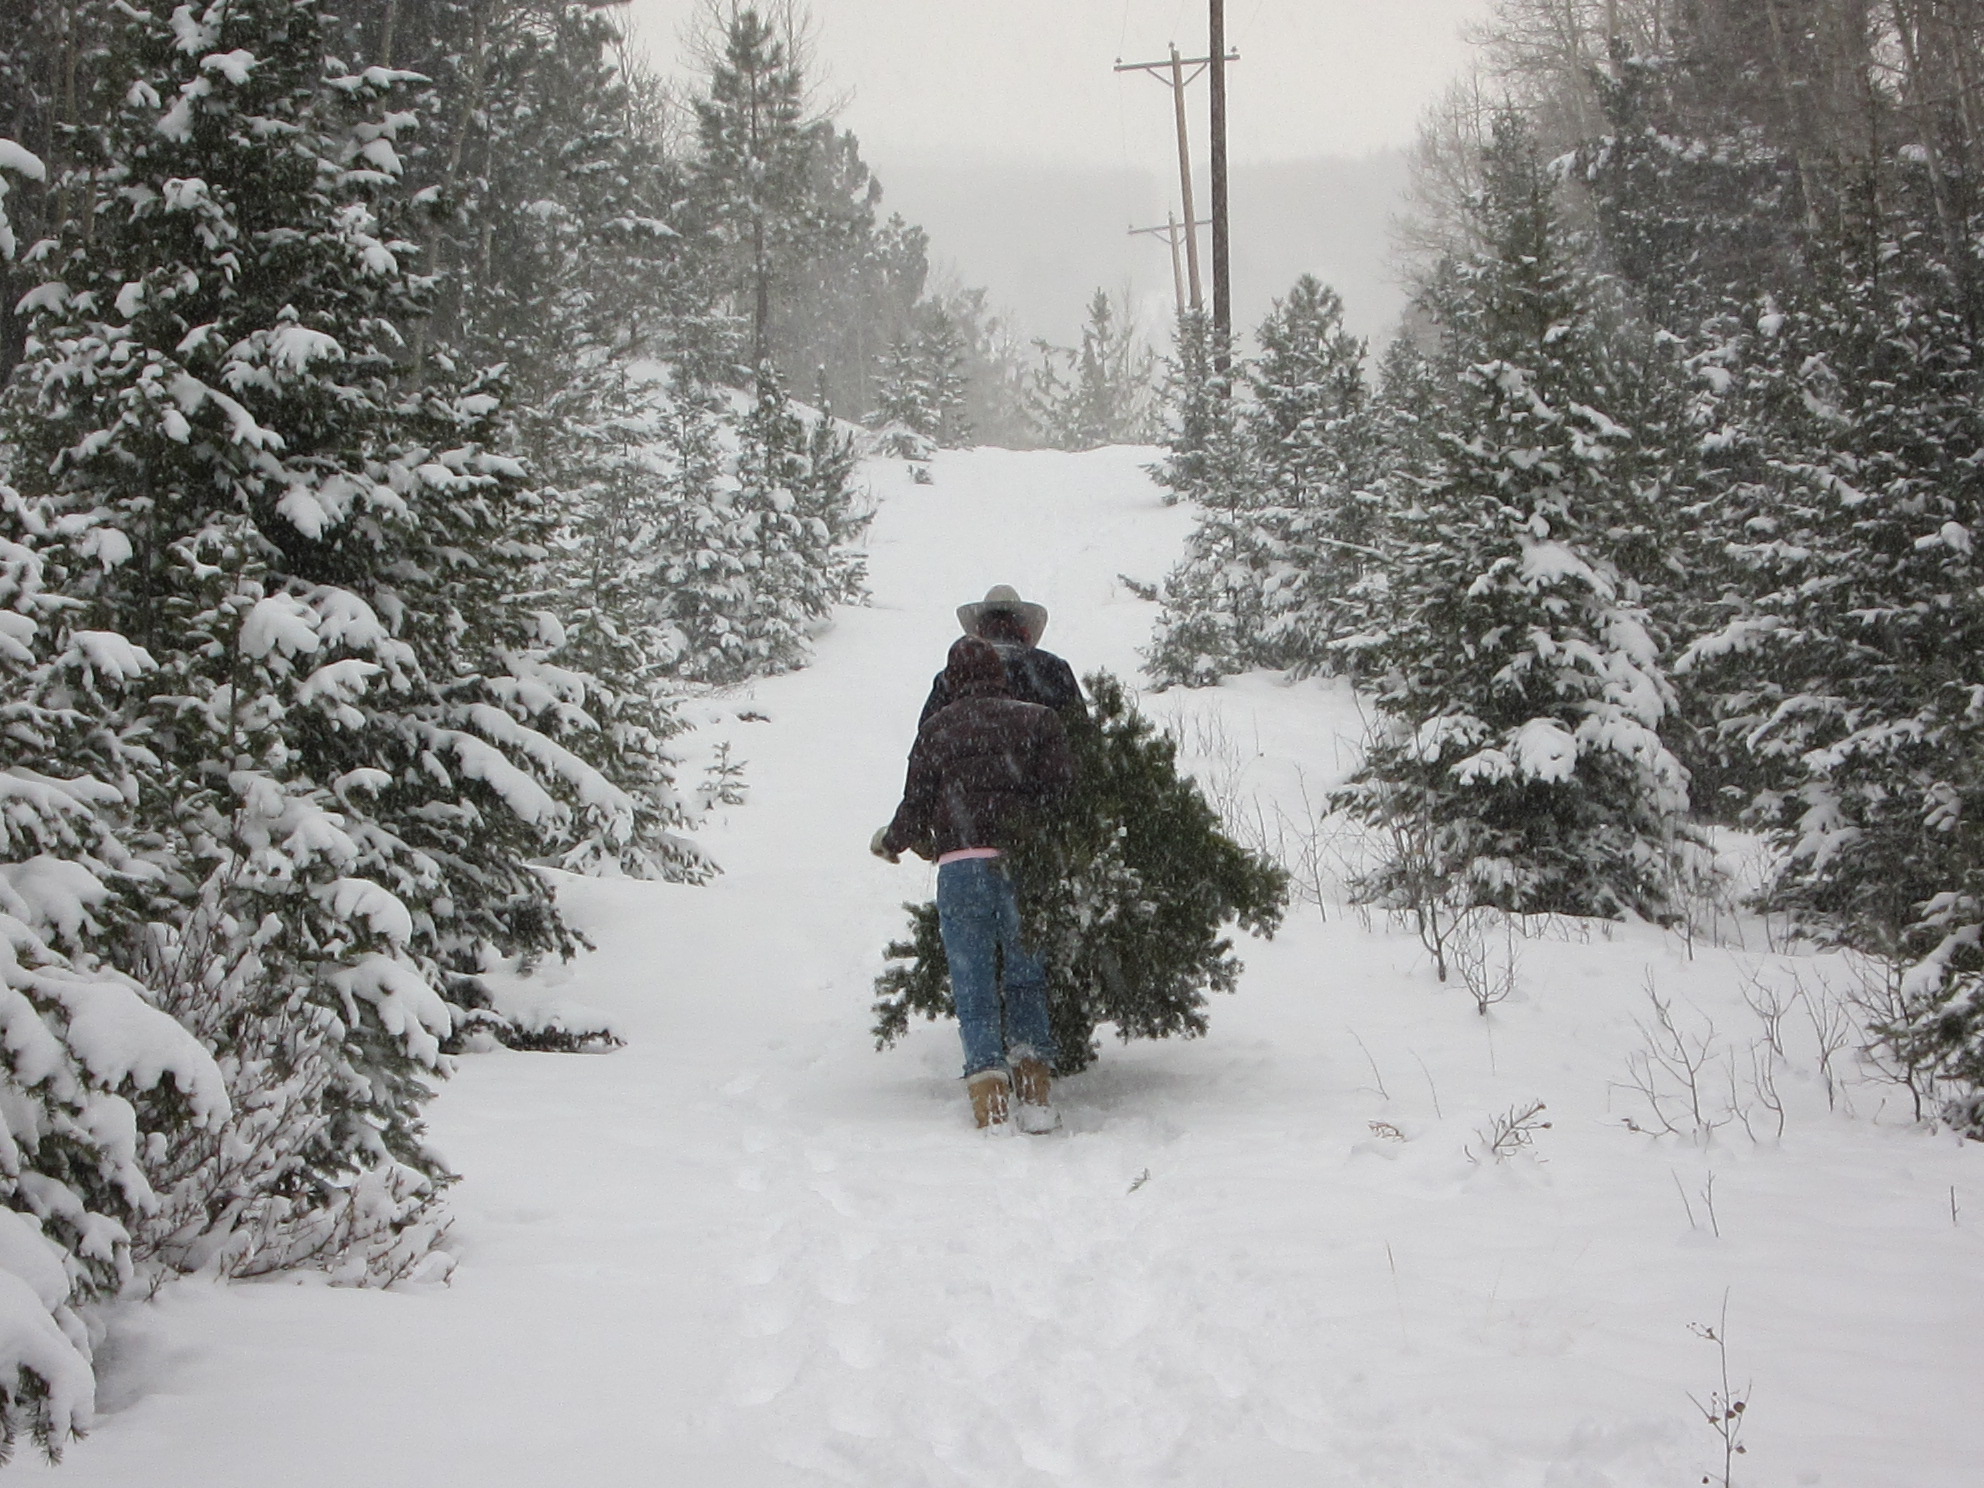 A father and daughter carry a Christmas Tree through a snowy forest opening.